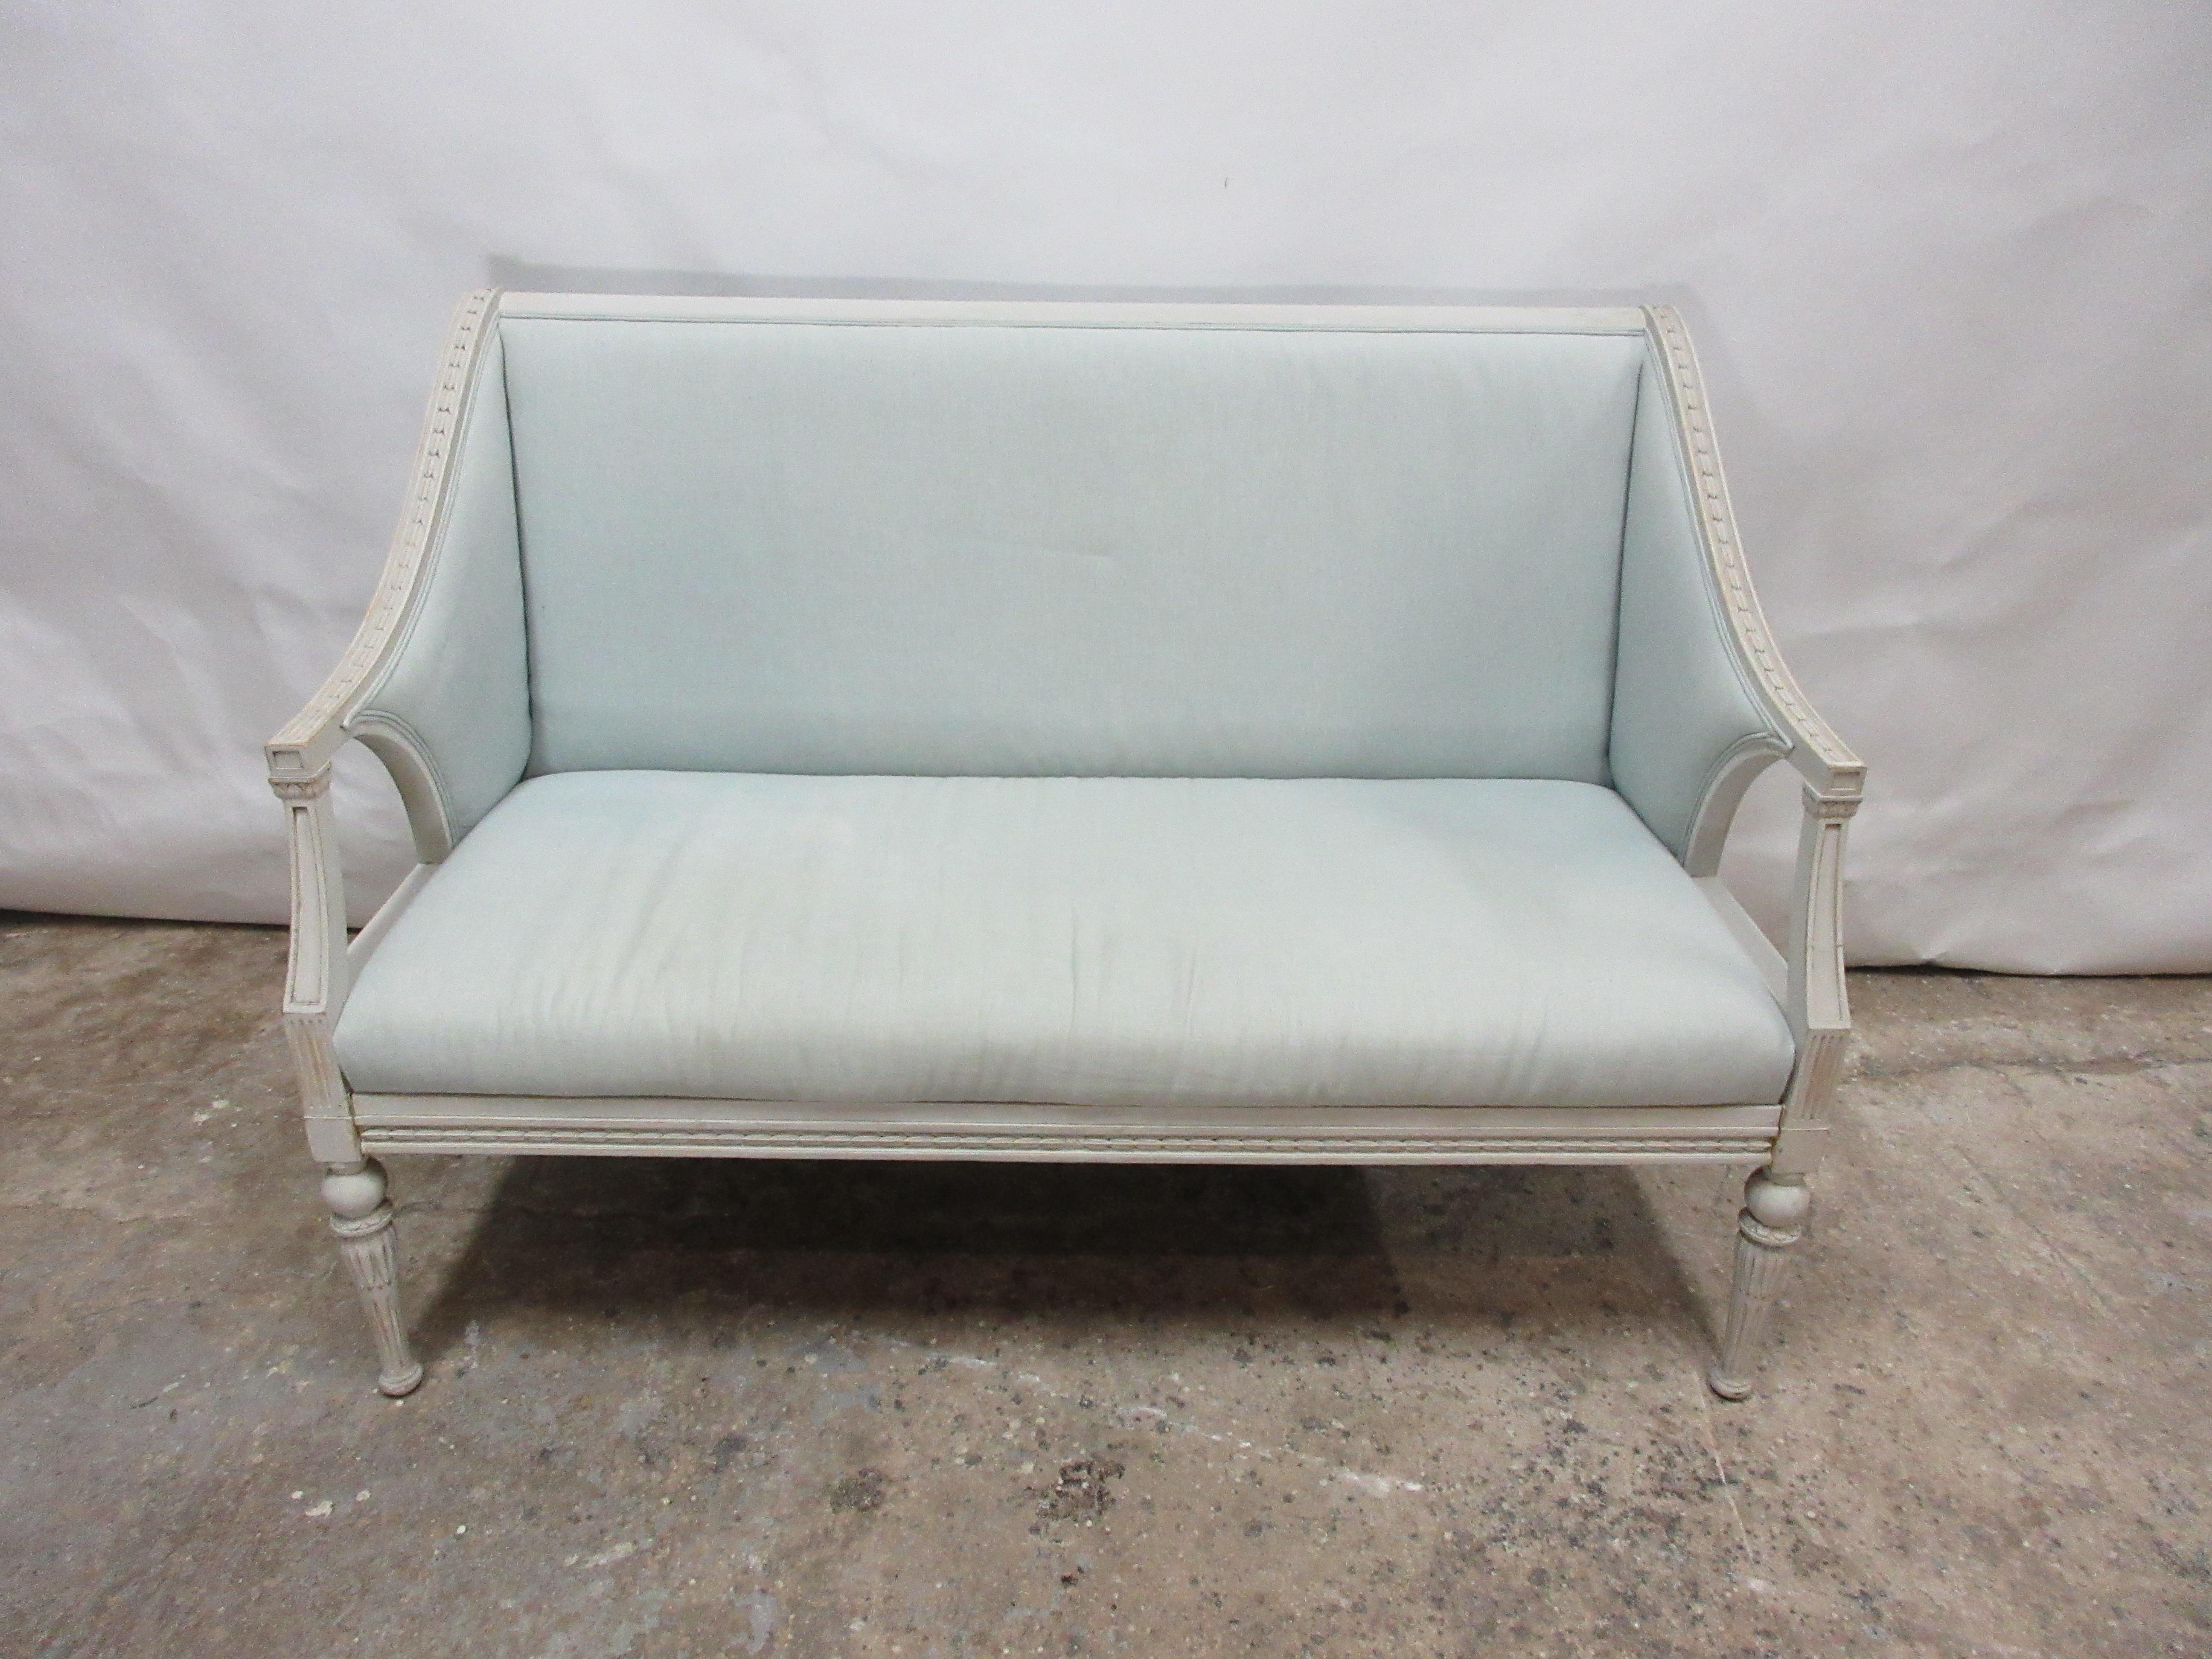 This is a Swedish Gustavian settee. When it was restored, it was repainted in milk paints 